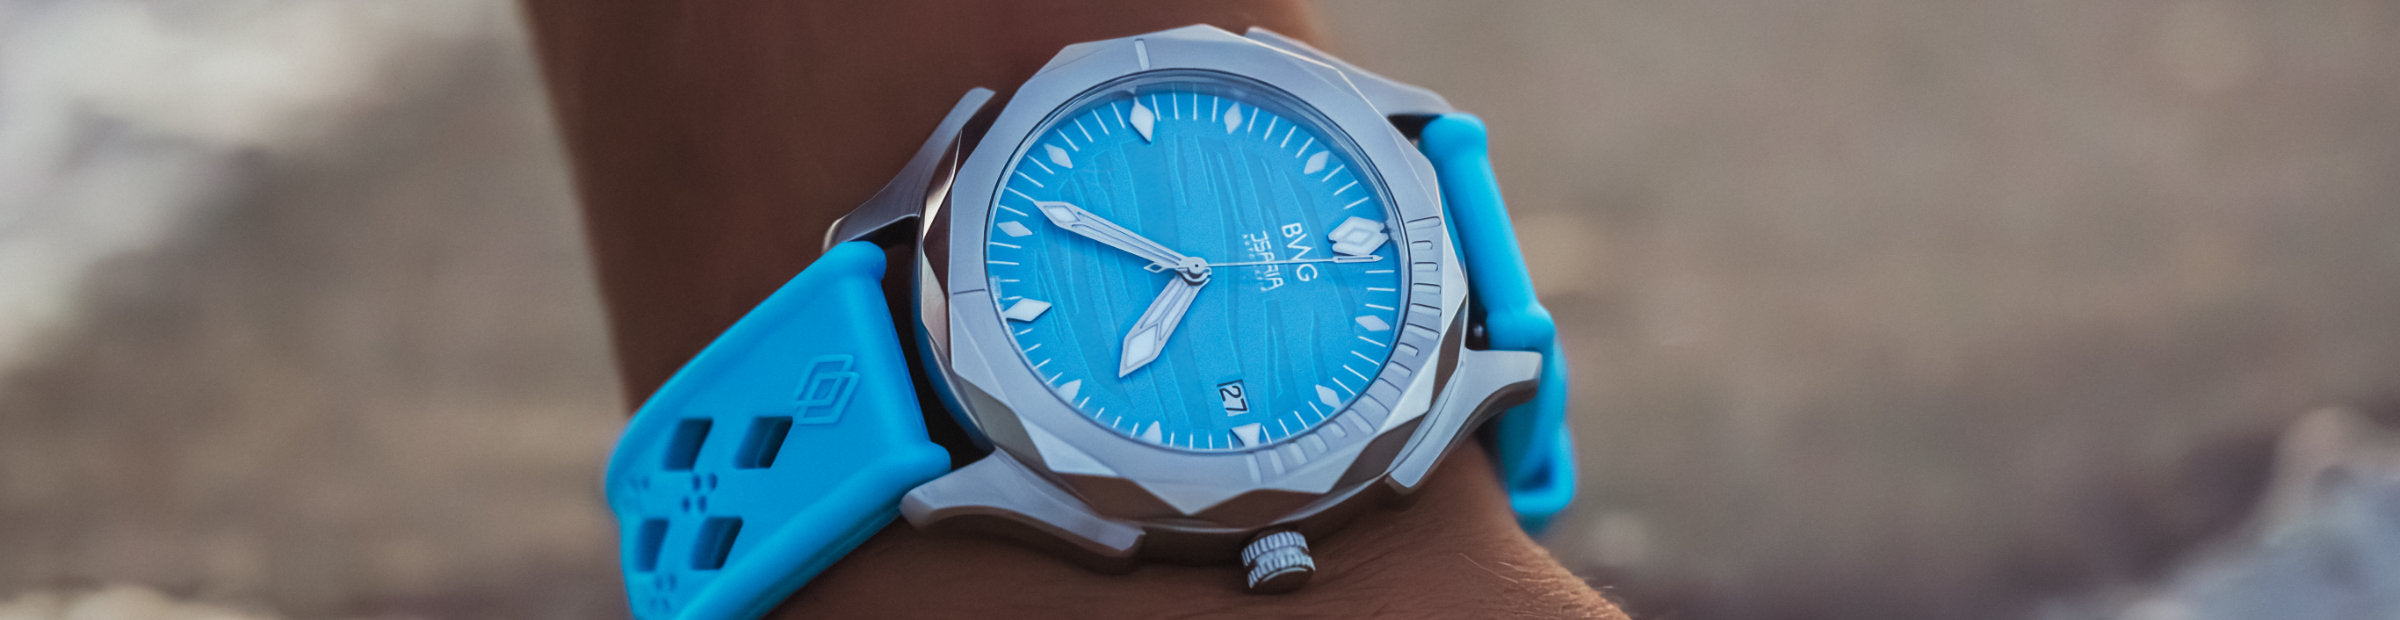 Title of BWG Bavarian Watch Watch Online Store showing the BWG ISARIA Automatic watch Swiss Movement Landeron L24 manufacture in sky blue on the beach